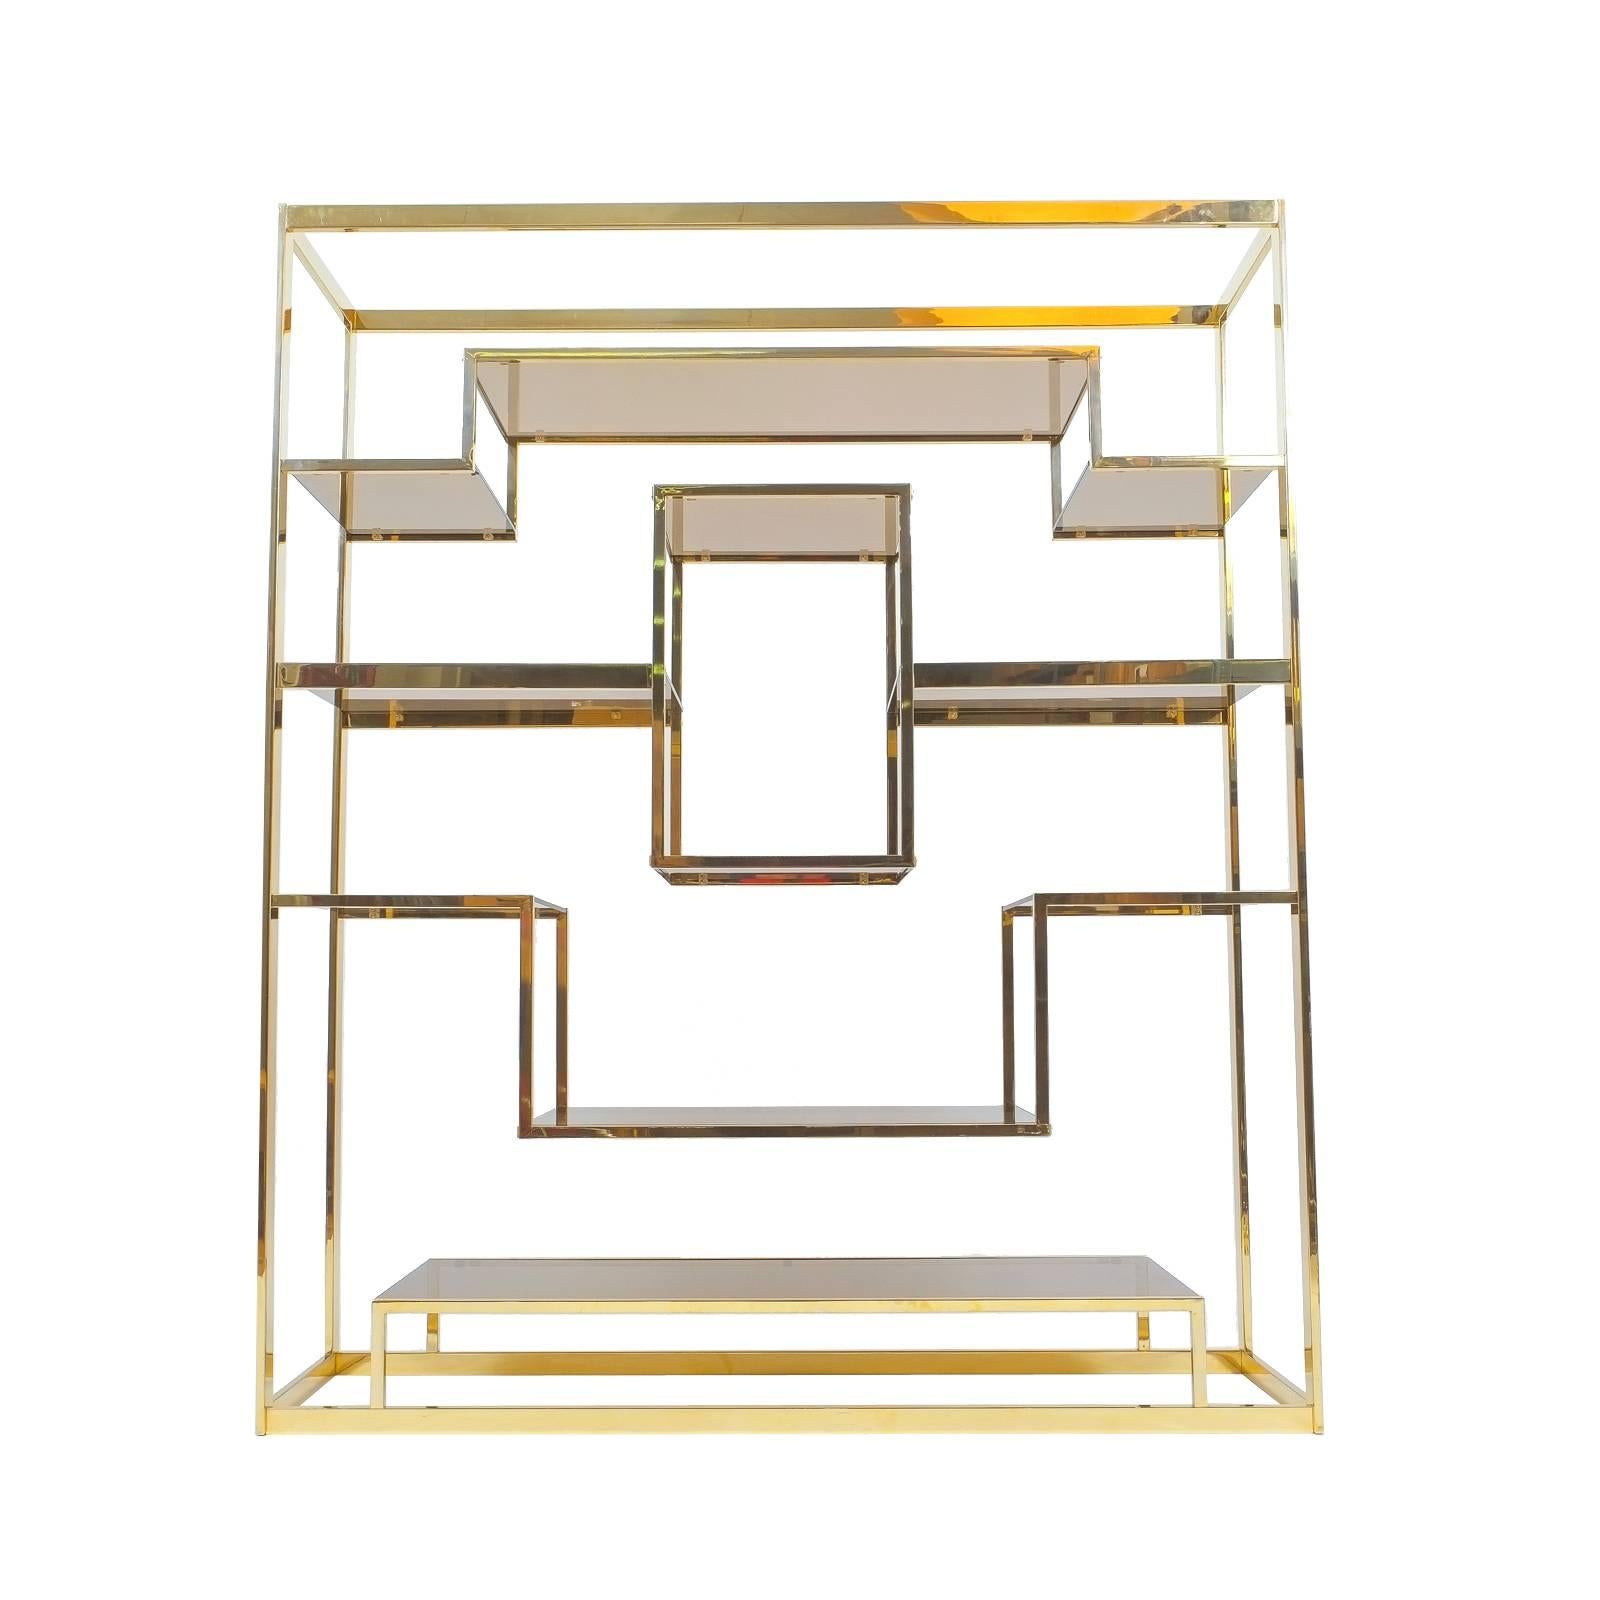 Beautiful spatial shelf by Romeo Rega, solid polished brass shelving structure with smoked glass shelves in excellent condition. Will work perfectly as a floating room divider. To visit our storefront please click on our logo /DERIVE at the bottom